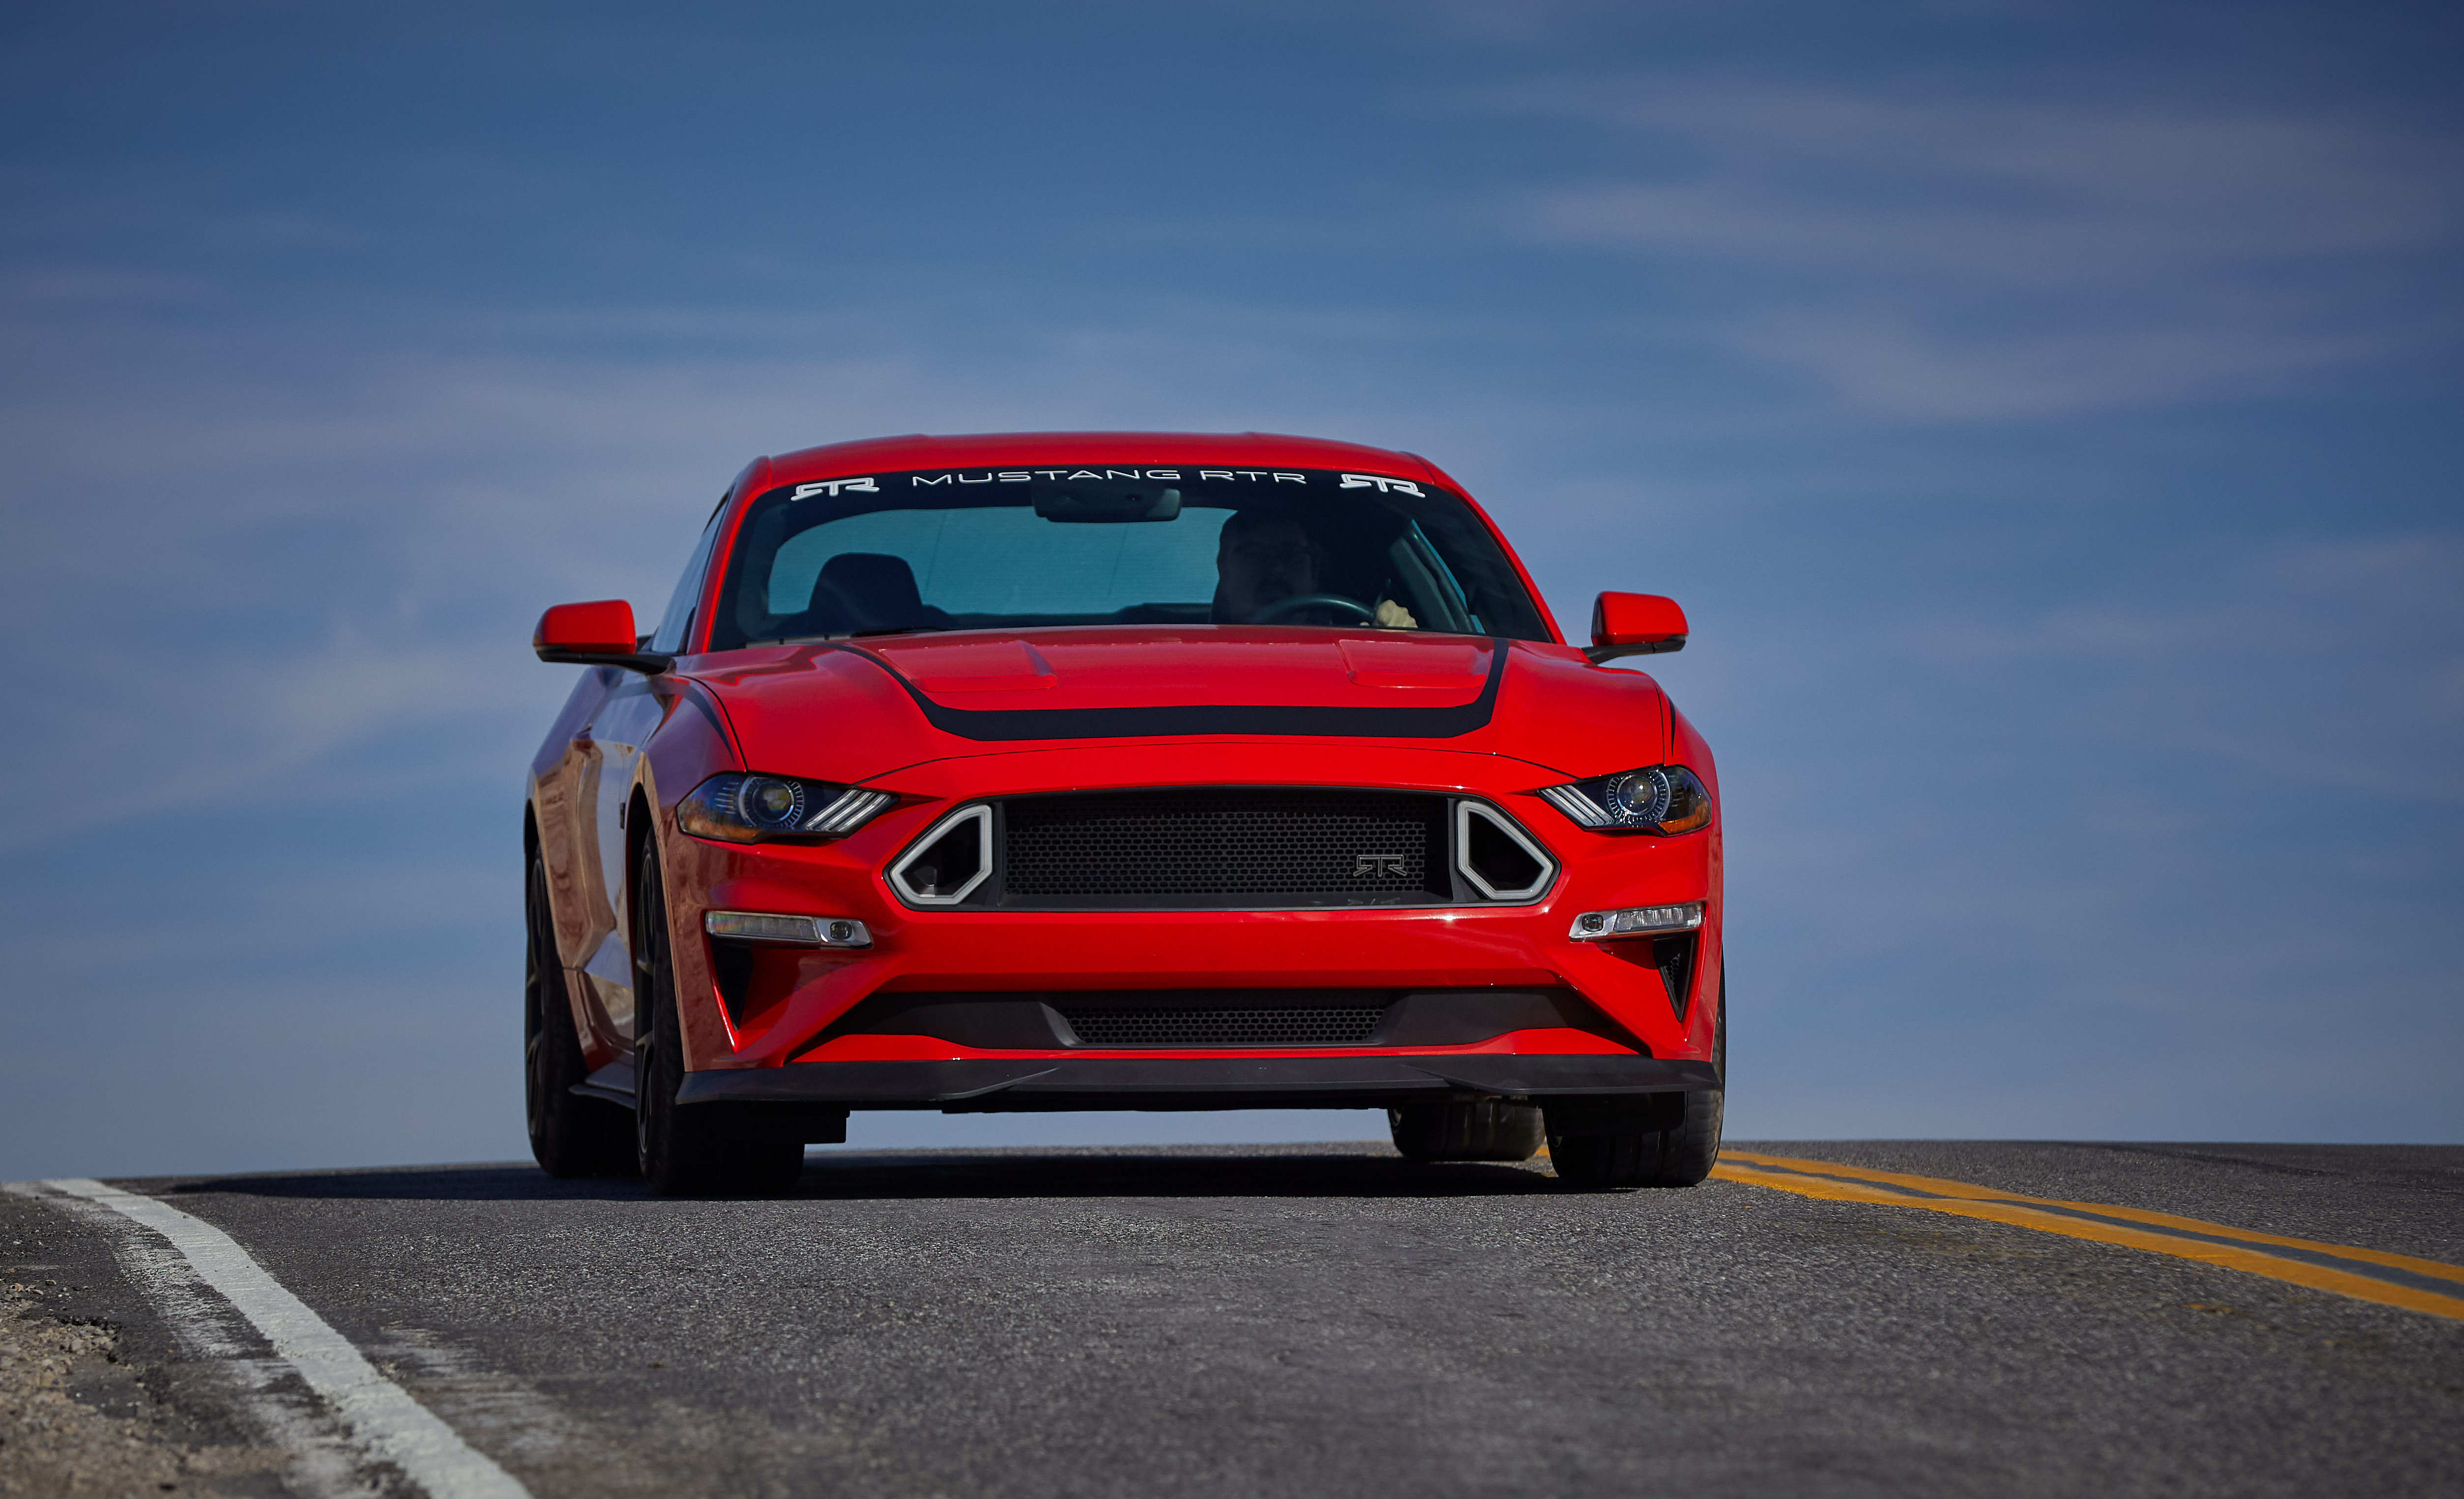 Ford Mustang Series 1 RTR Wallpaper (HD Image)